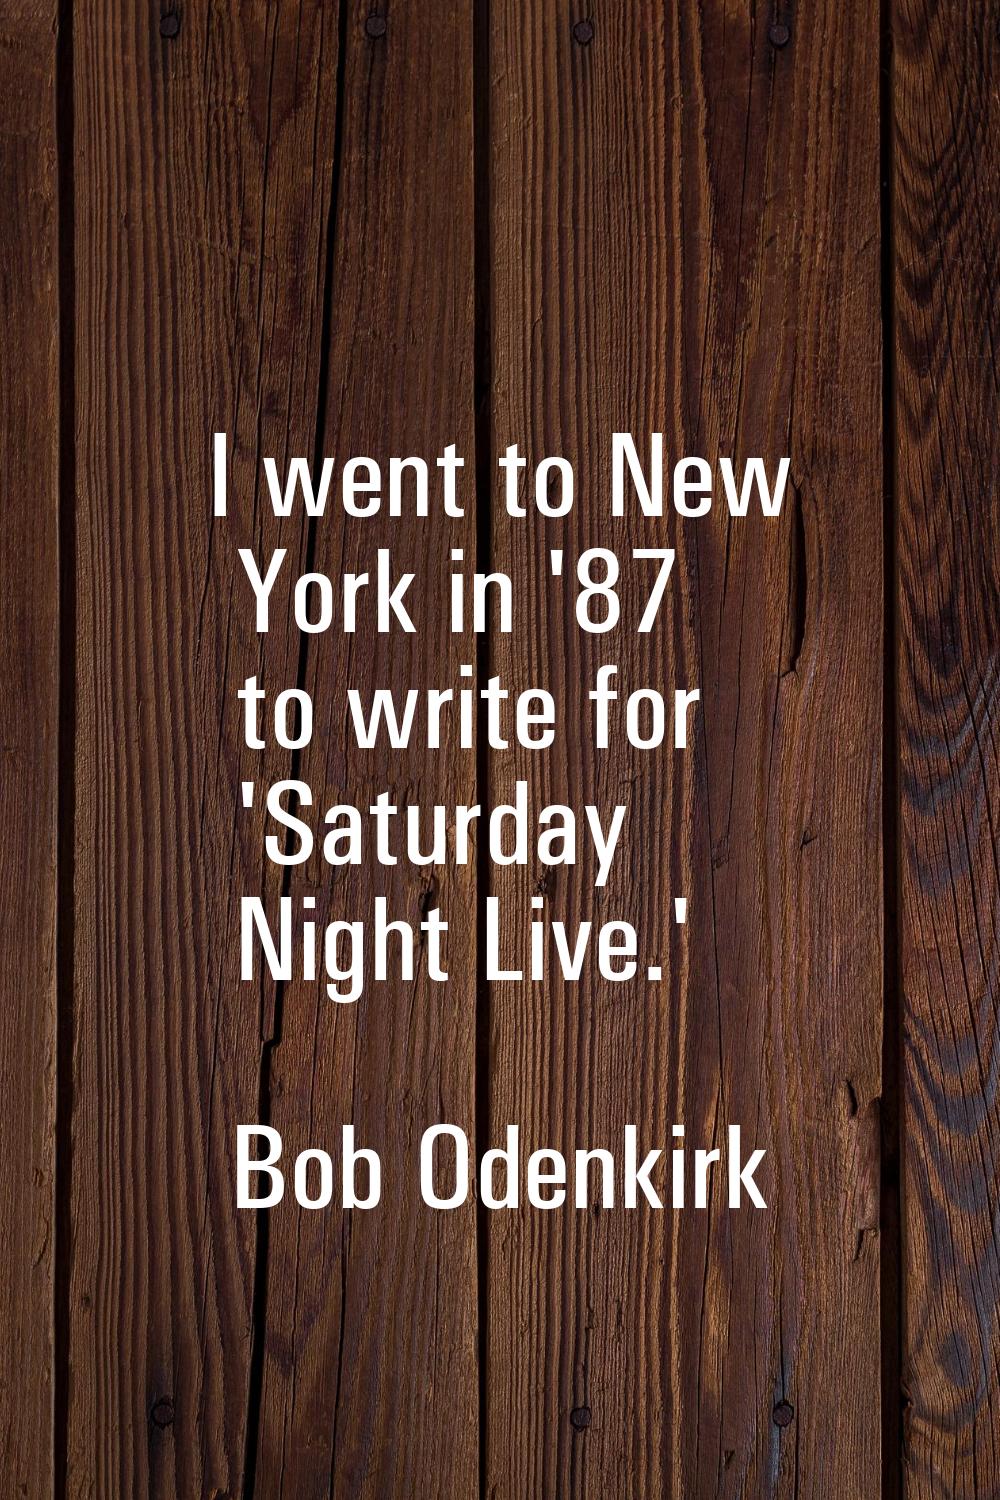 I went to New York in '87 to write for 'Saturday Night Live.'